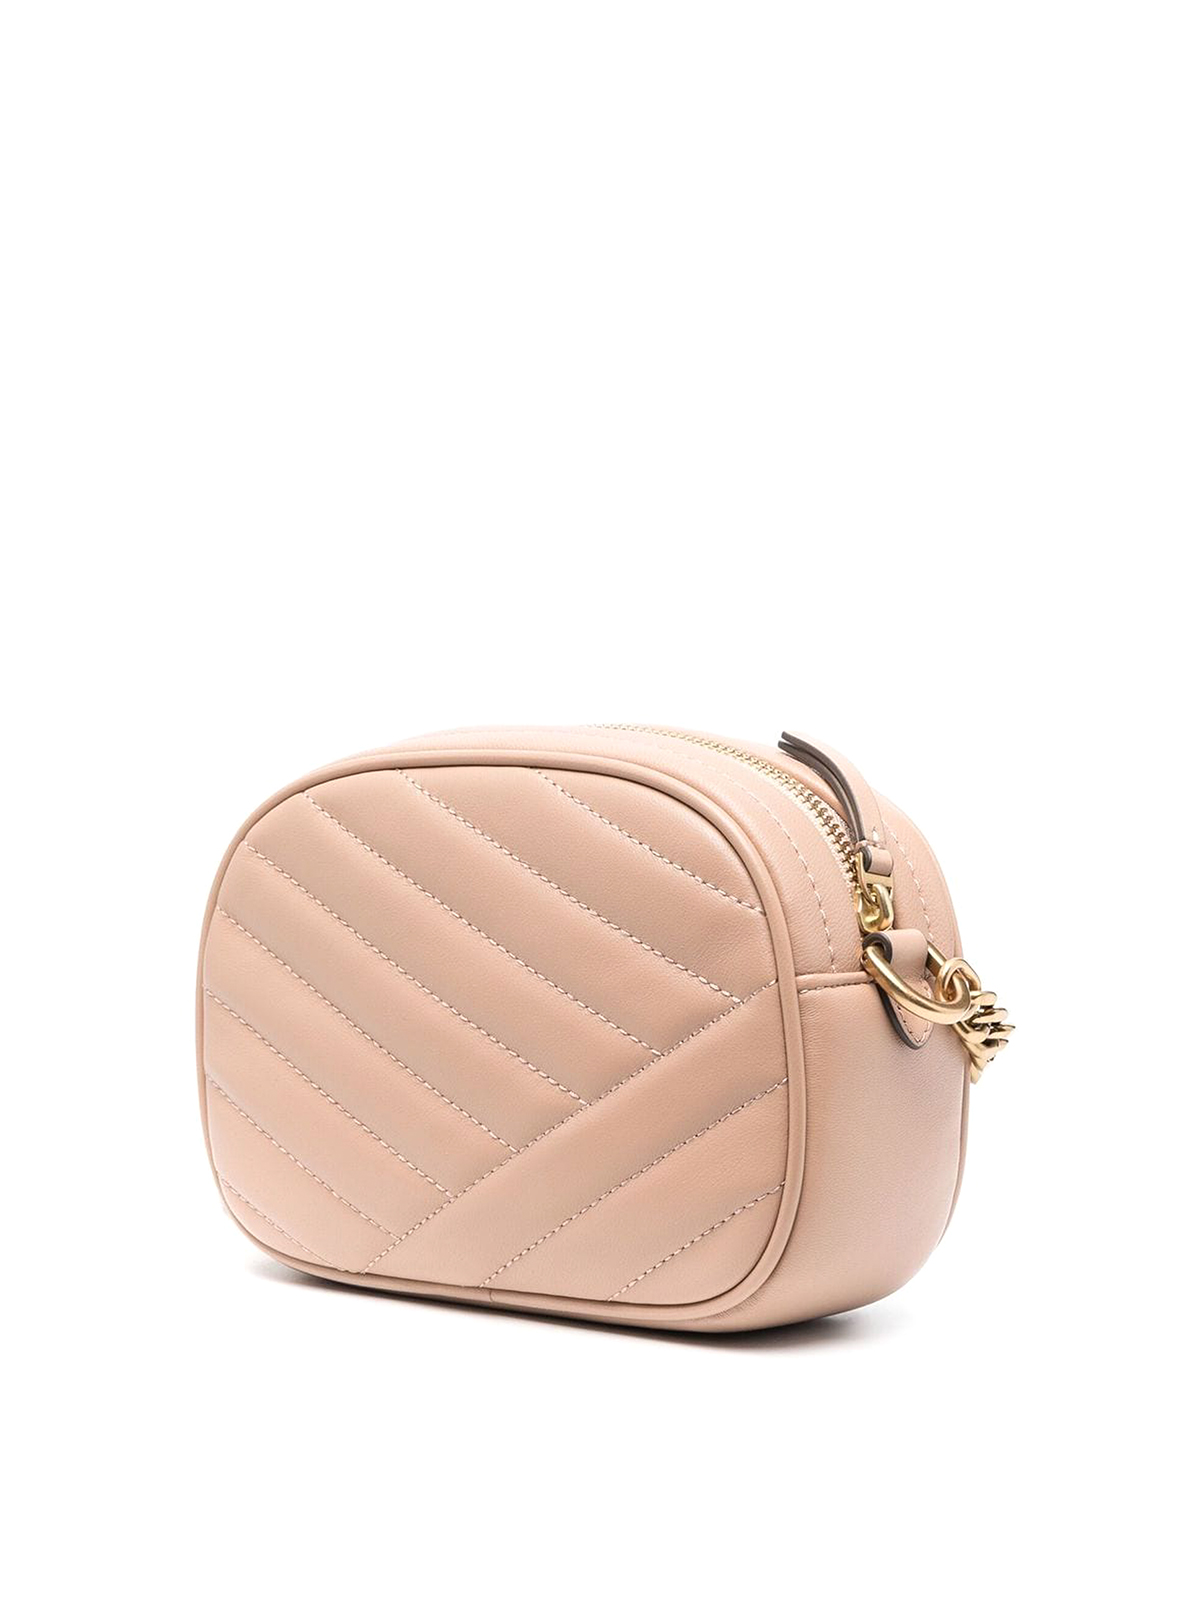 Tory Burch, Bags, Light Pink Quilted Tory Burch Bag